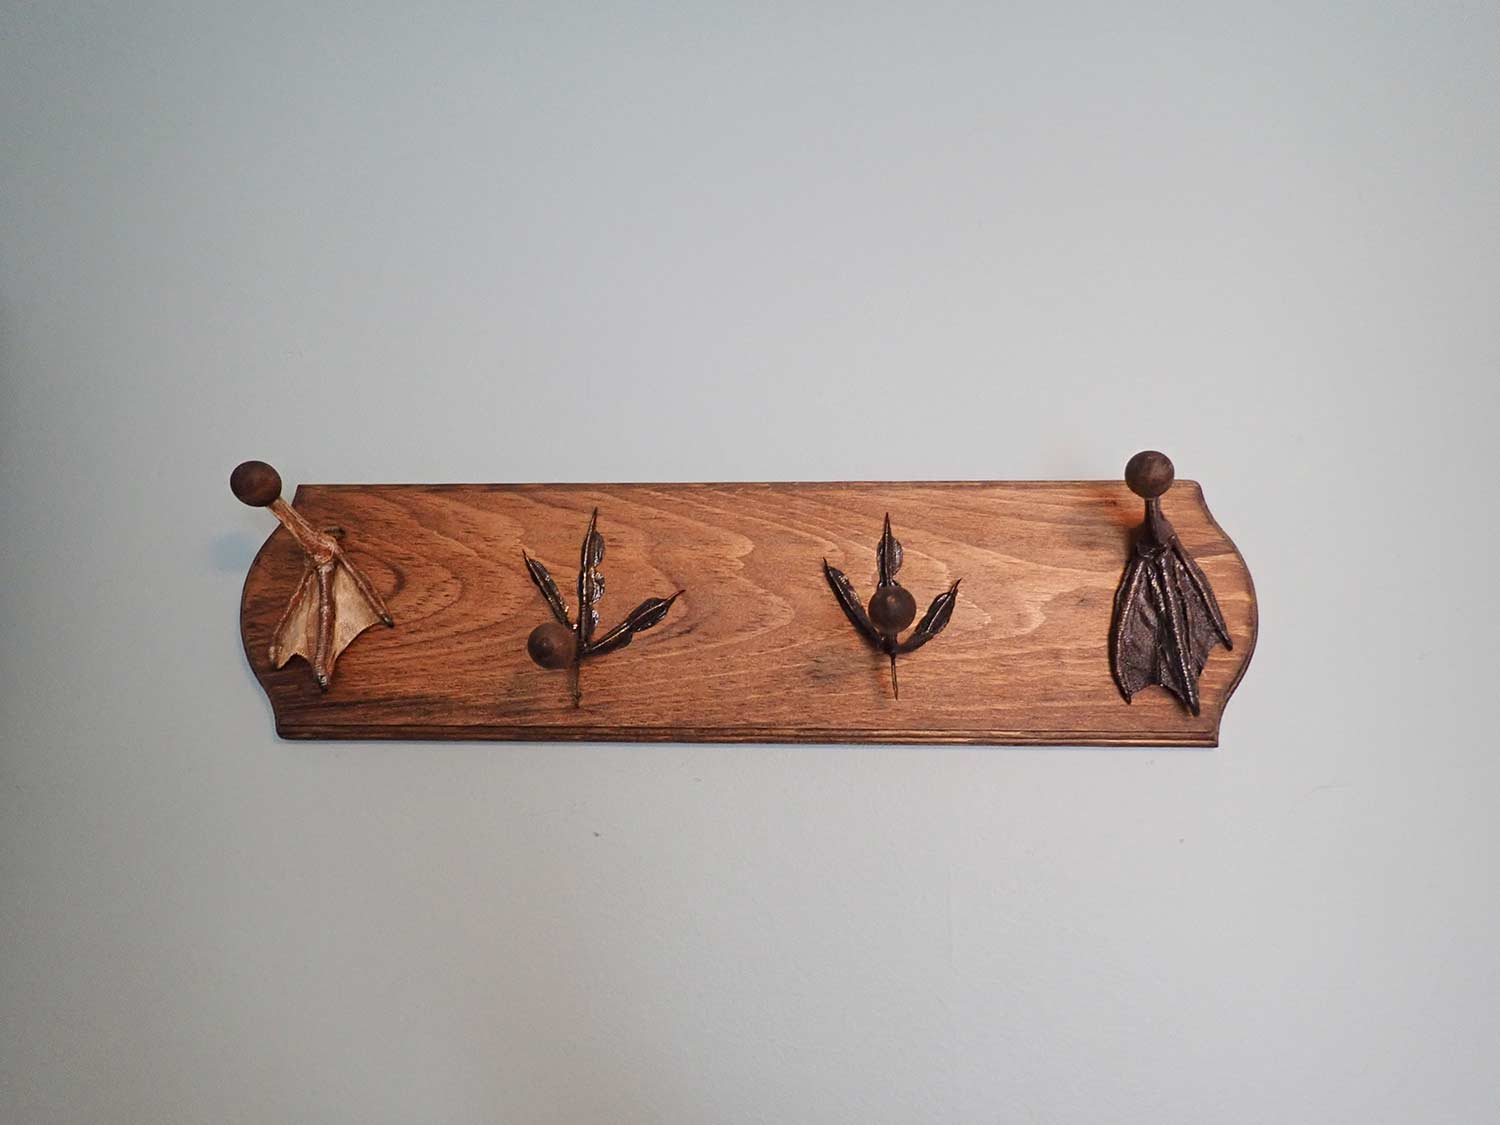 A hat rack made of wood and duck feet.